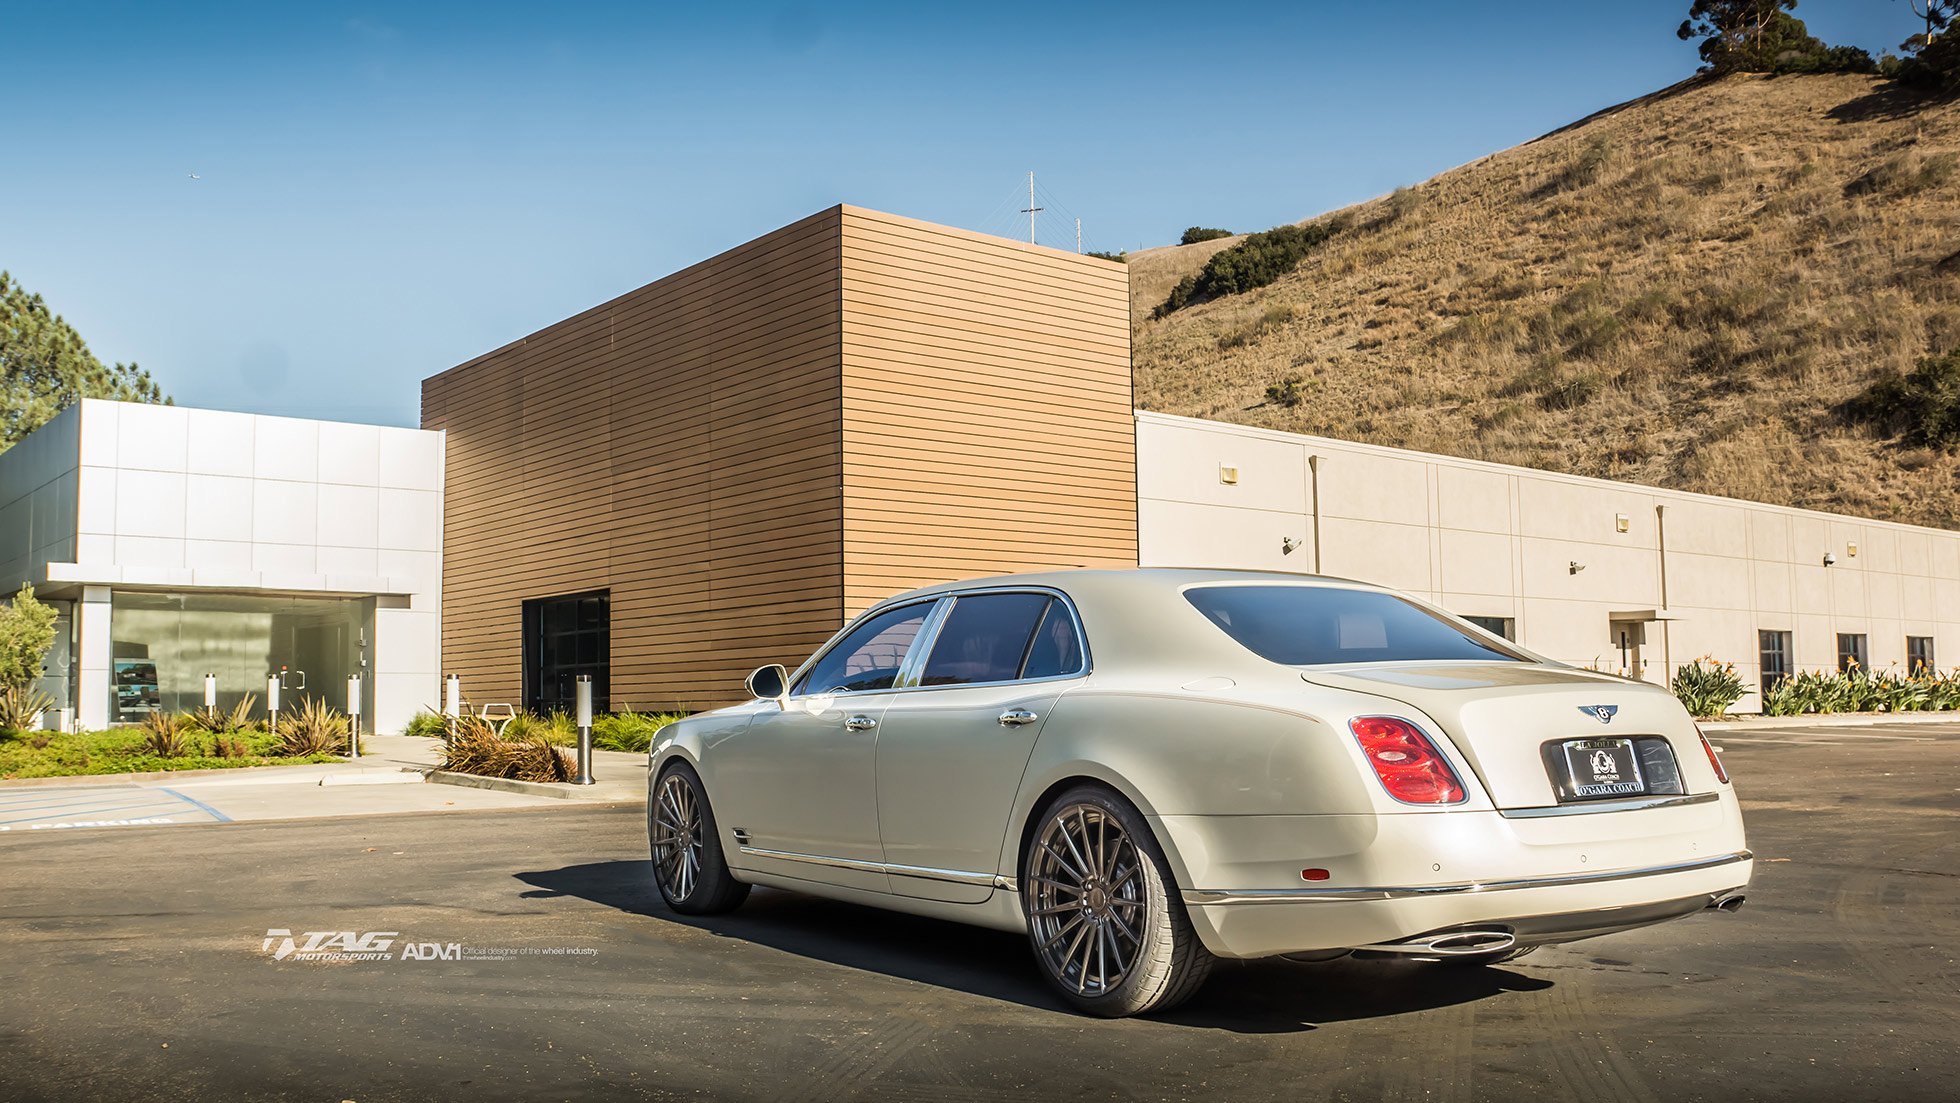 White Bentley Mulsanne Red Taillights - Photo by ADV.1